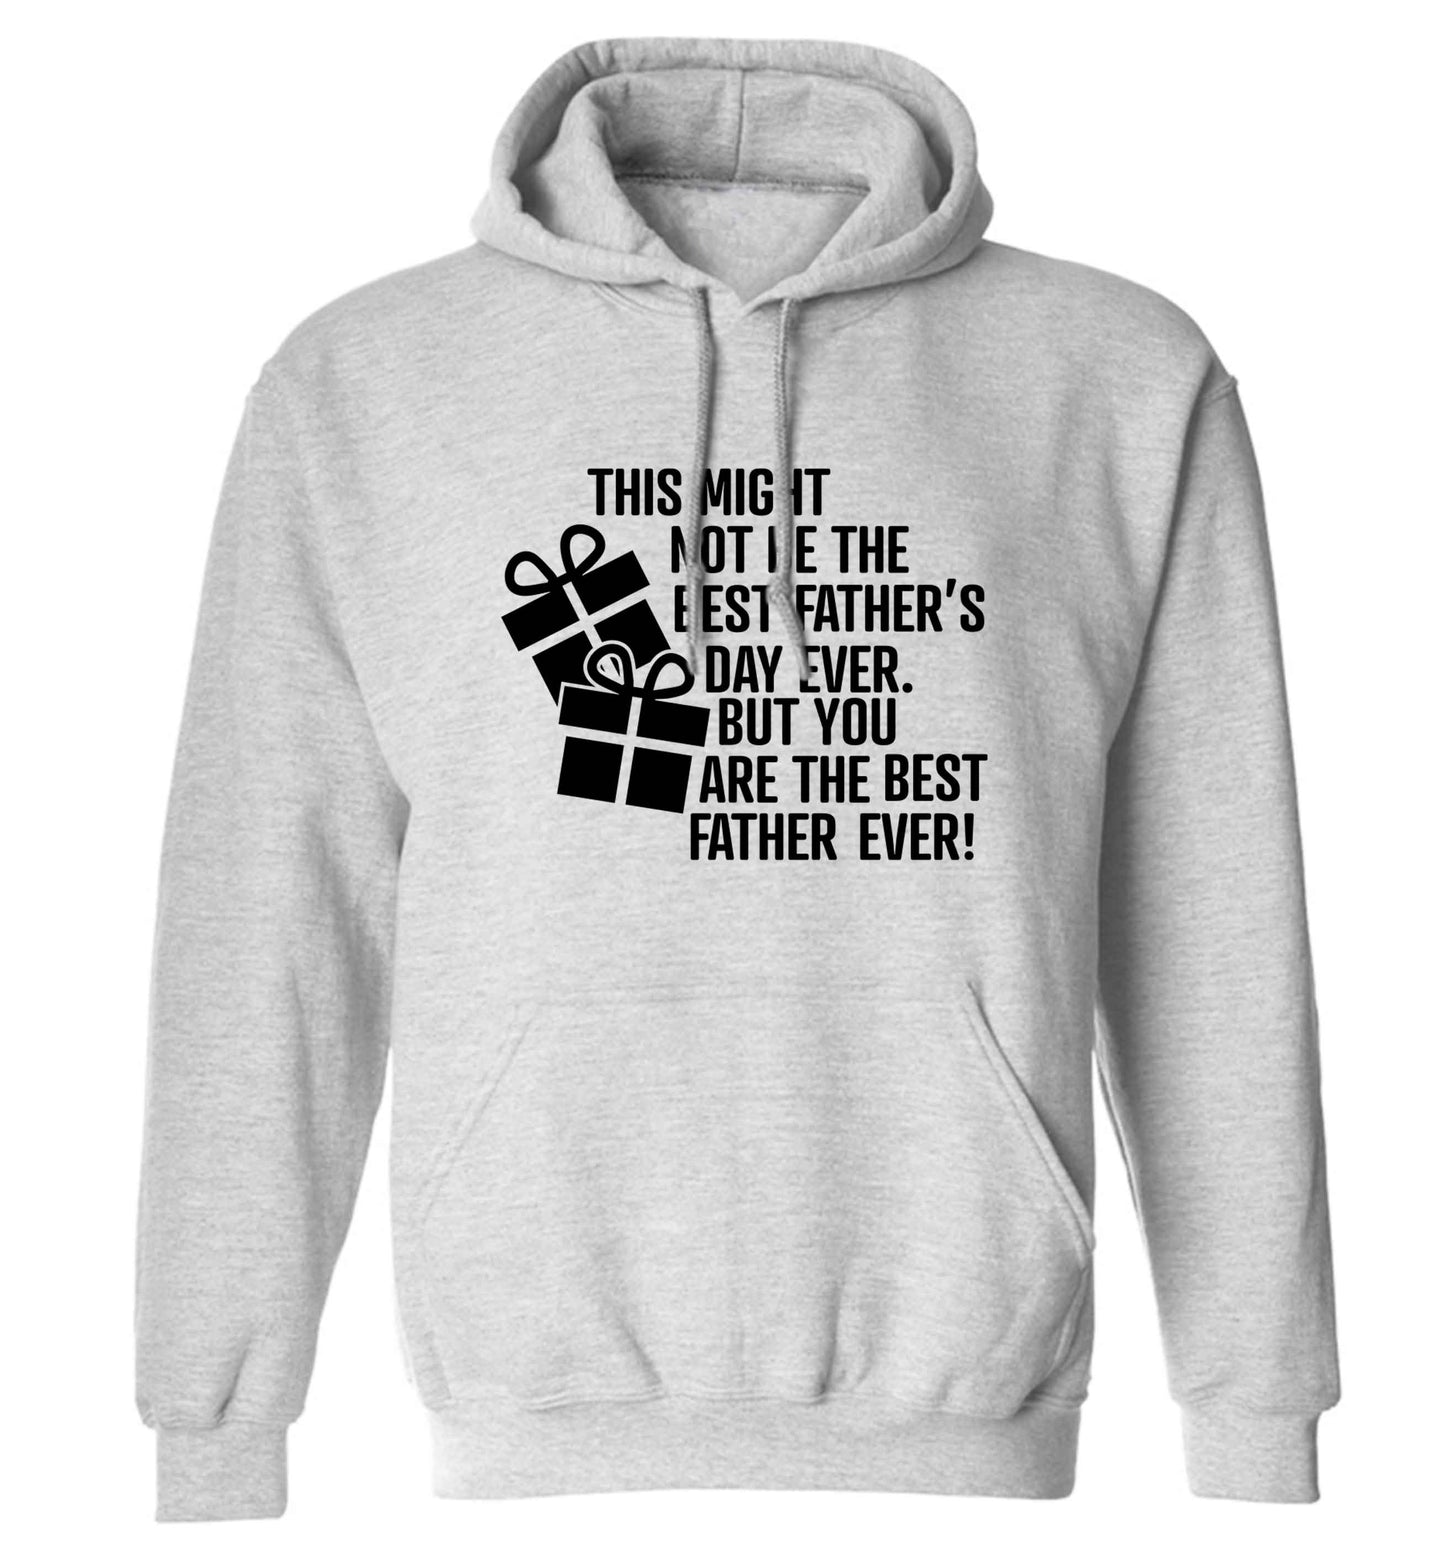 It might not be the best Father's Day ever but you are the best father ever! adults unisex grey hoodie 2XL